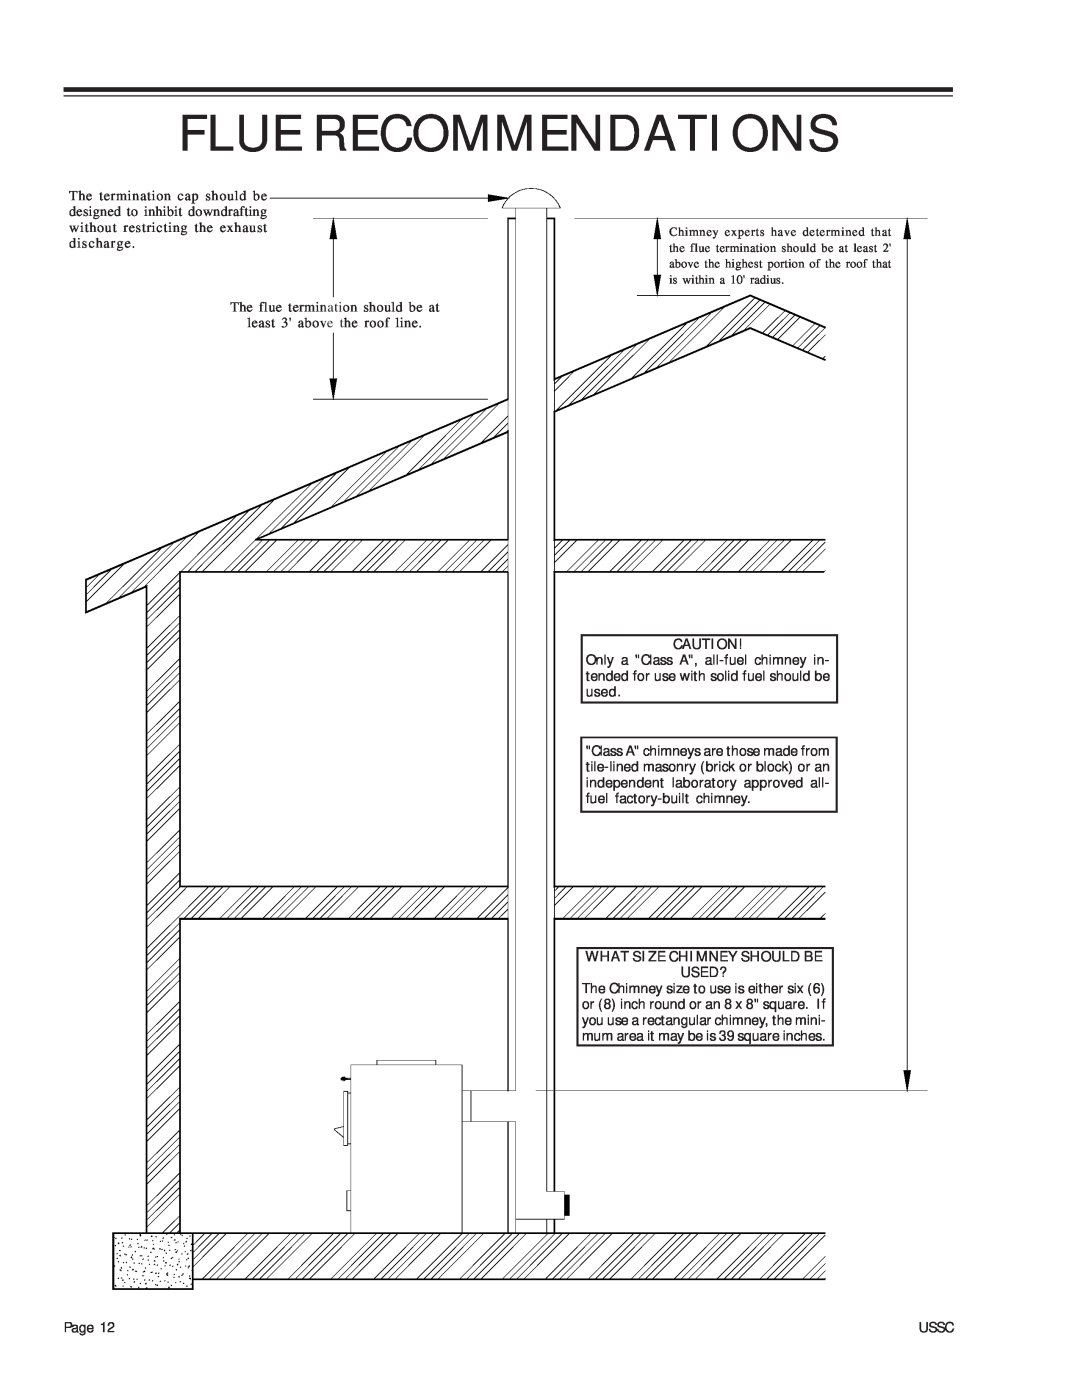 United States Stove 24AG, 24AF, 24AZ owner manual Flue Recommendations, What Size Chimney Should Be Used? 